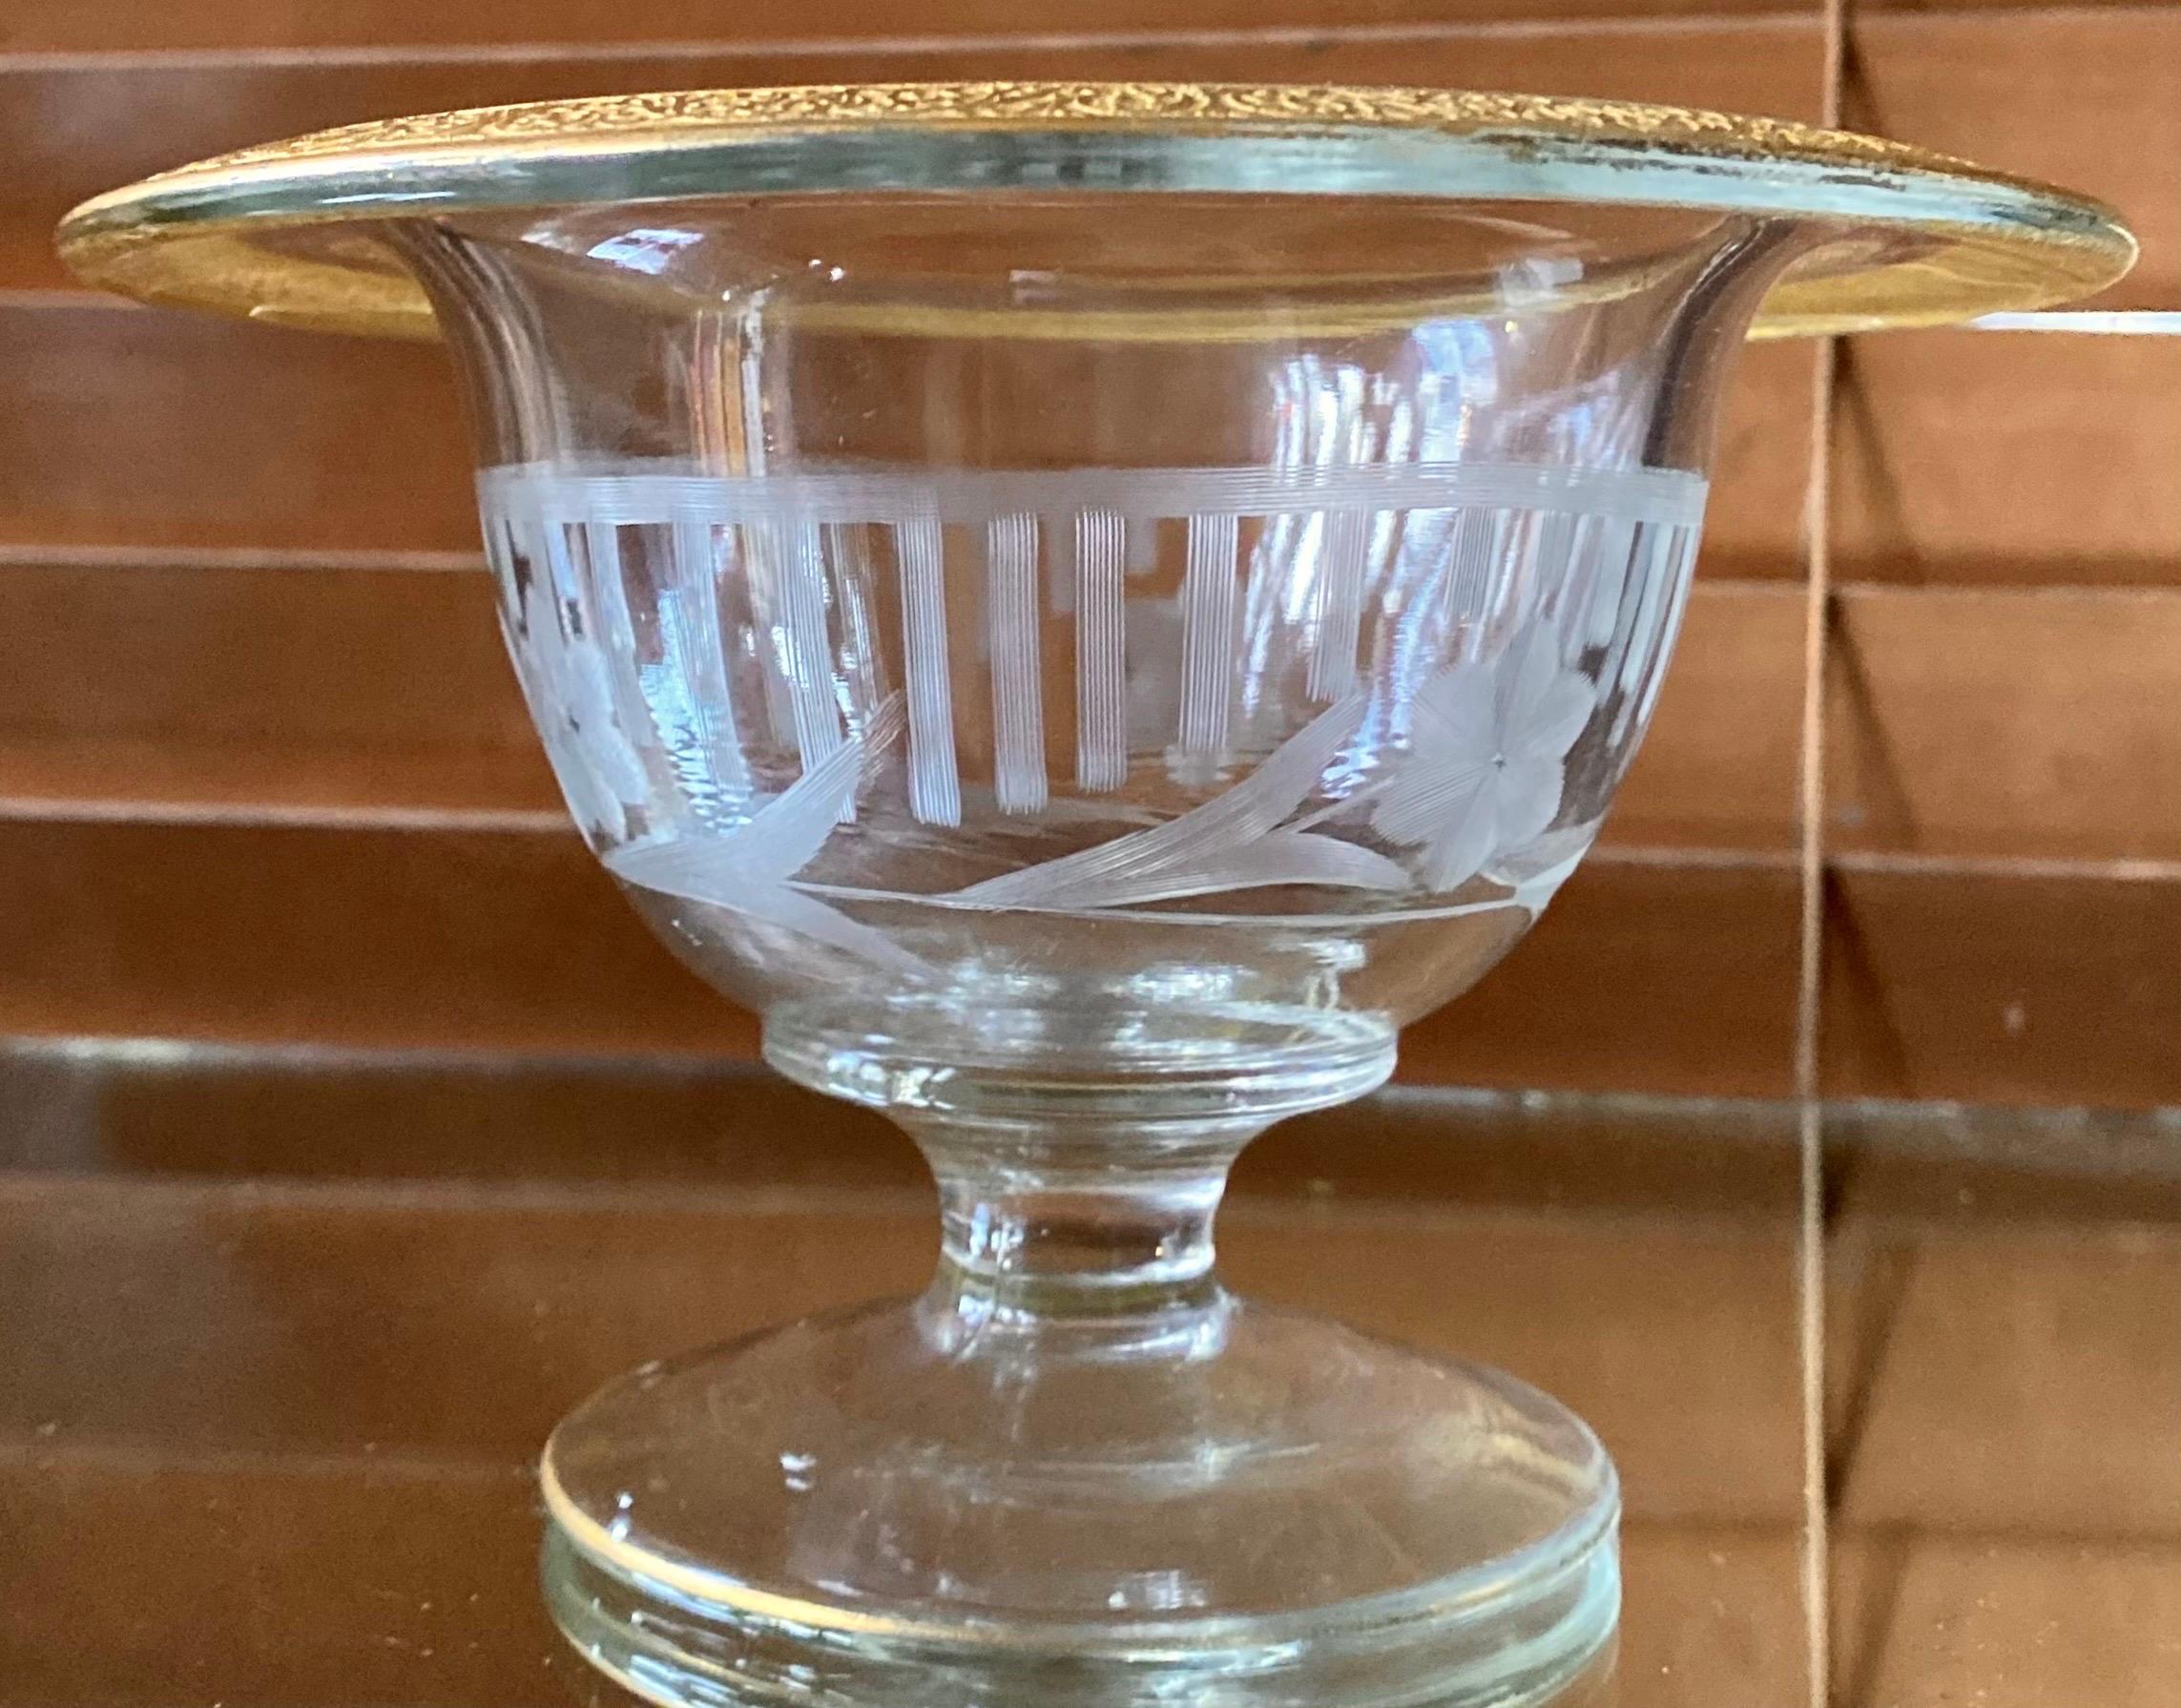 Art Deco Antique Cut Glass Footed Compote Dish With Chased Gold Florentine Trim. For Sale